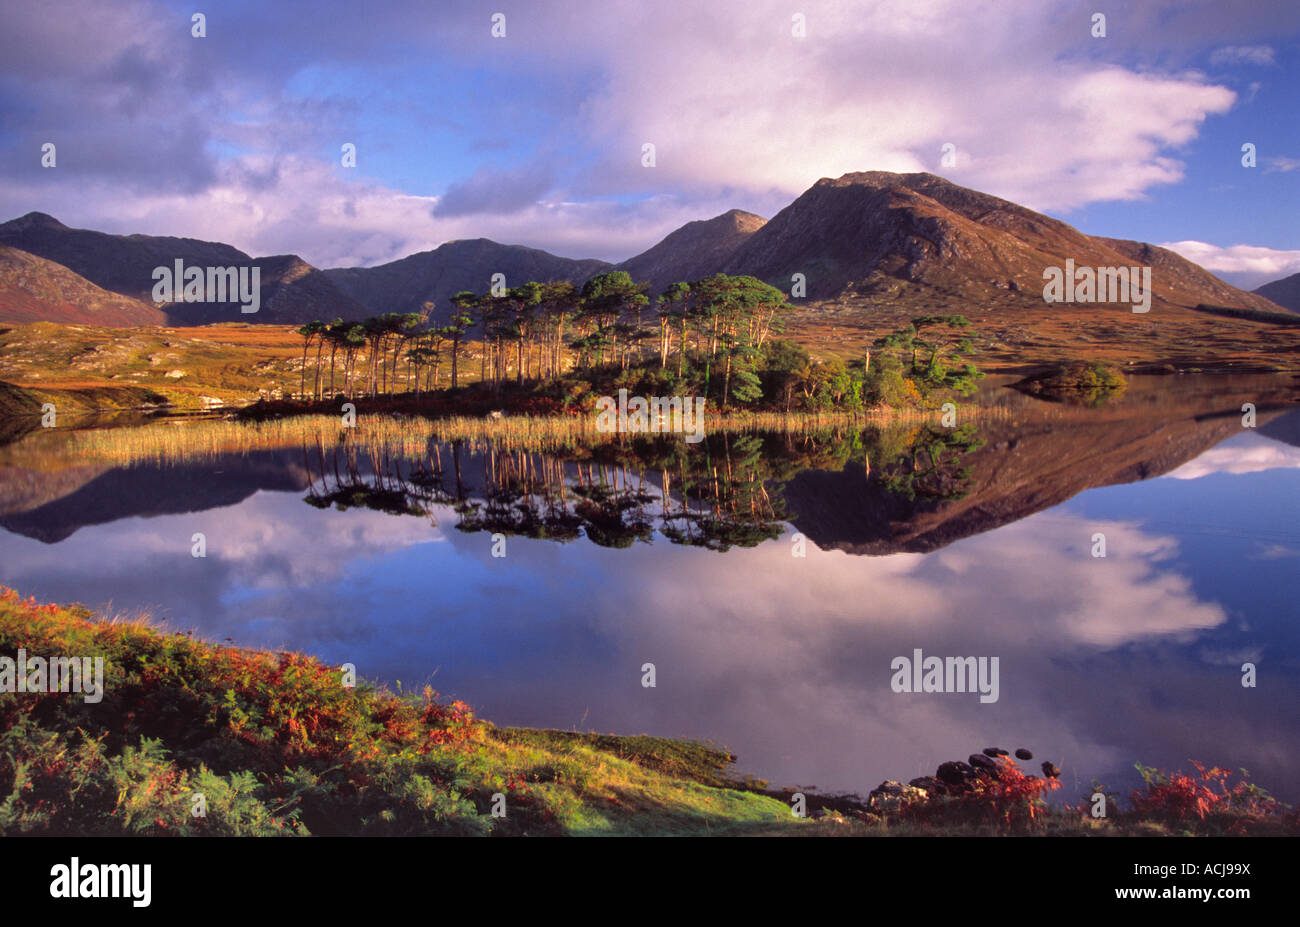 Dawn reflection of the Twelve Bens Mountains in Derryclare Lough, Connemara, County Galway, Ireland. Stock Photo